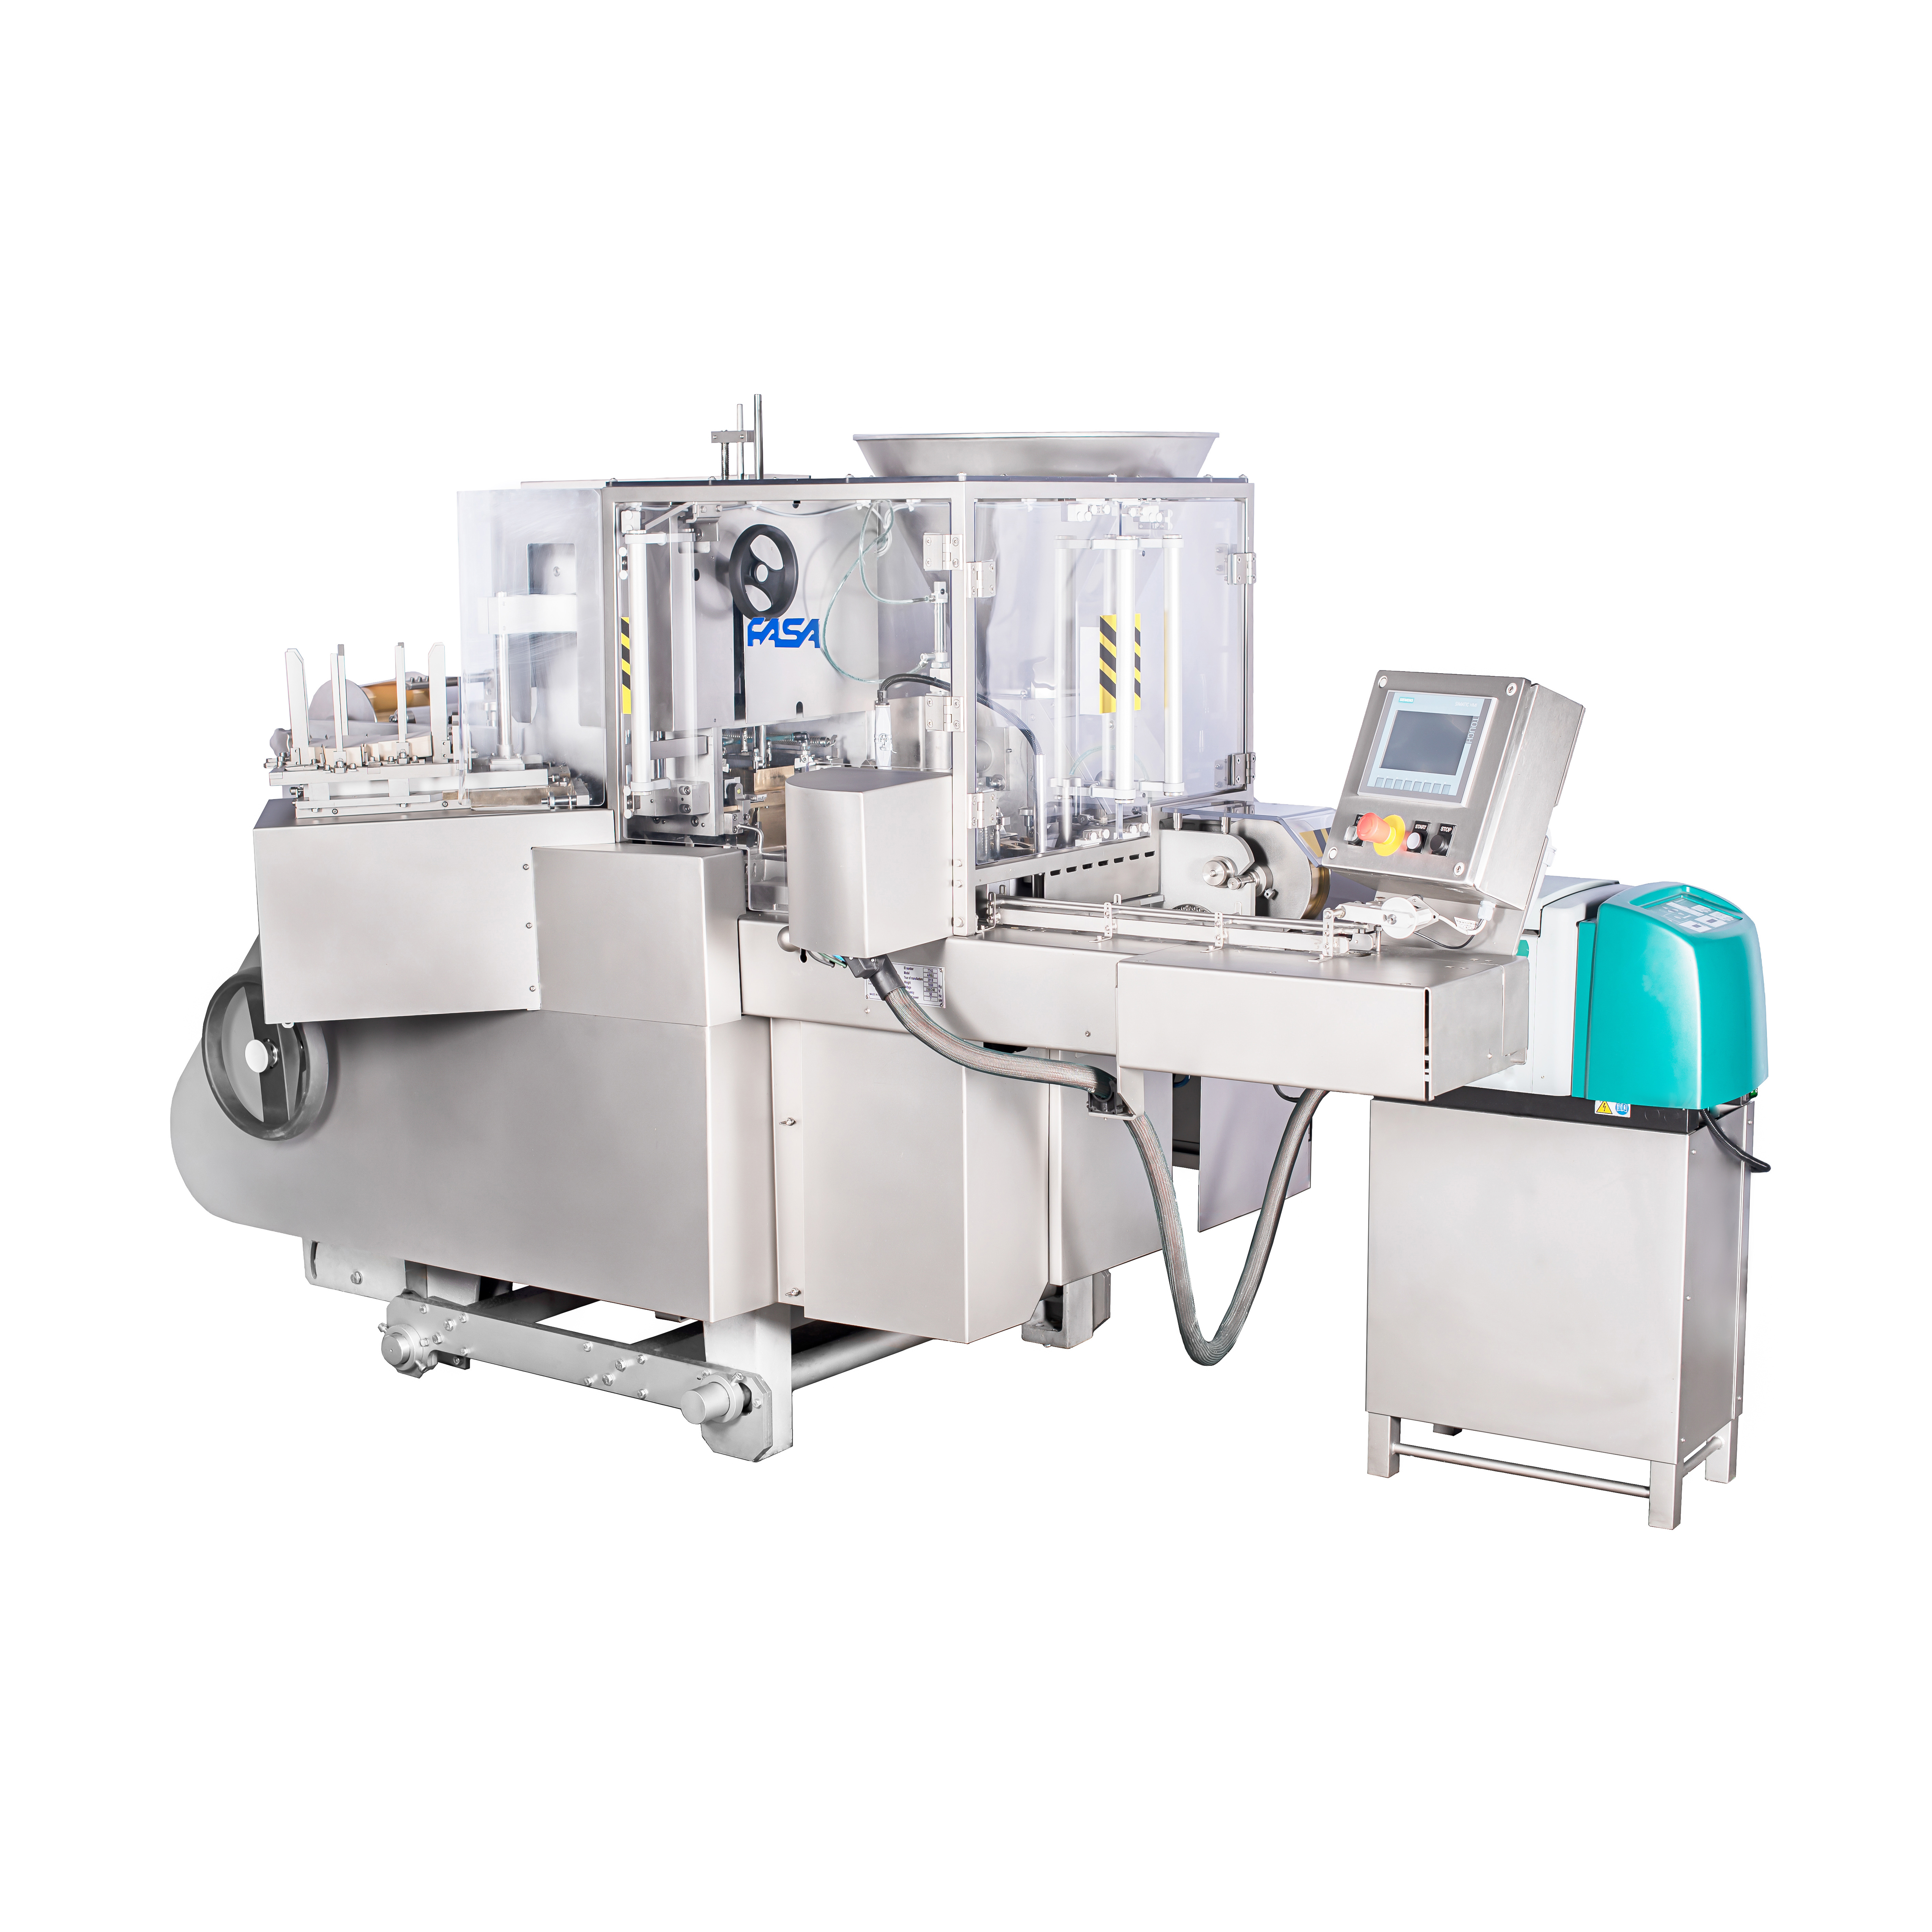 Processed cheese packaging and cartoning machine - AR6U